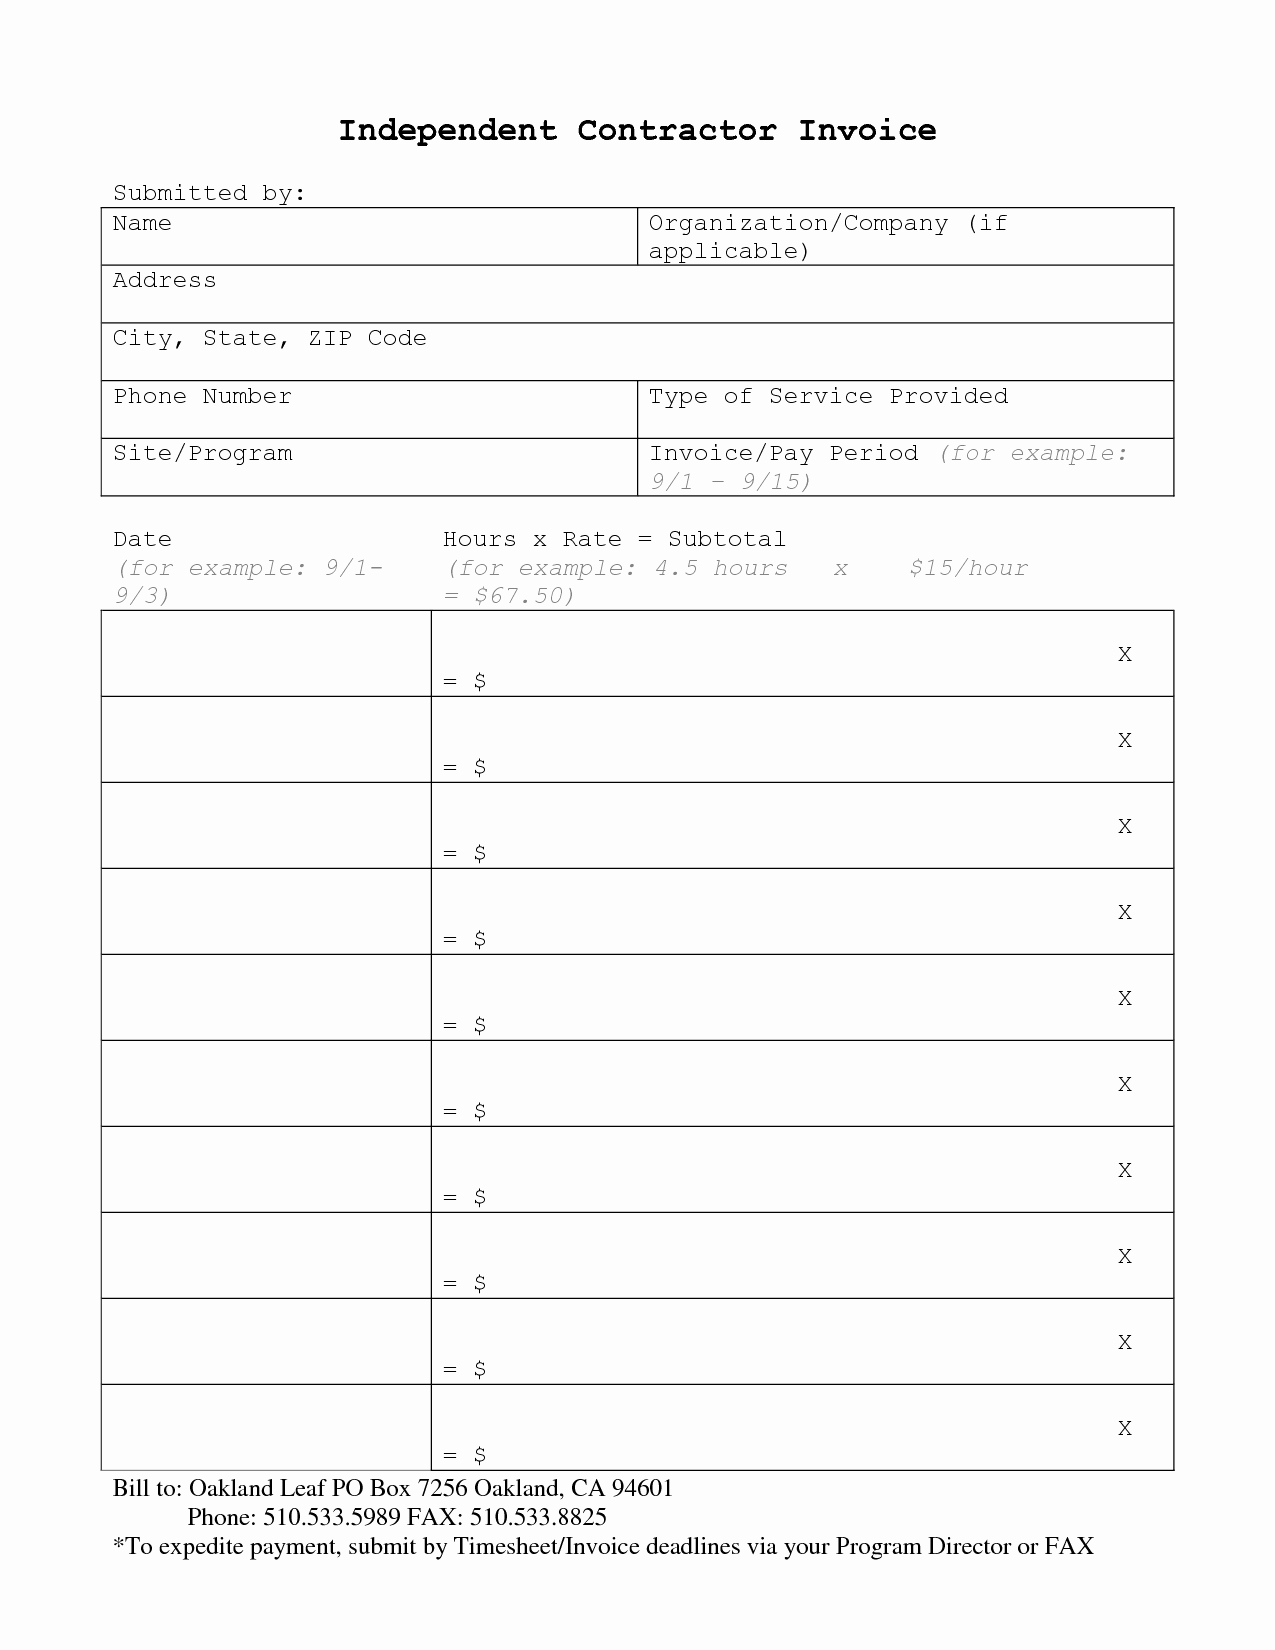 Independent Contractor Invoice Template Pdf Luxury Independent Contractor Invoice Template